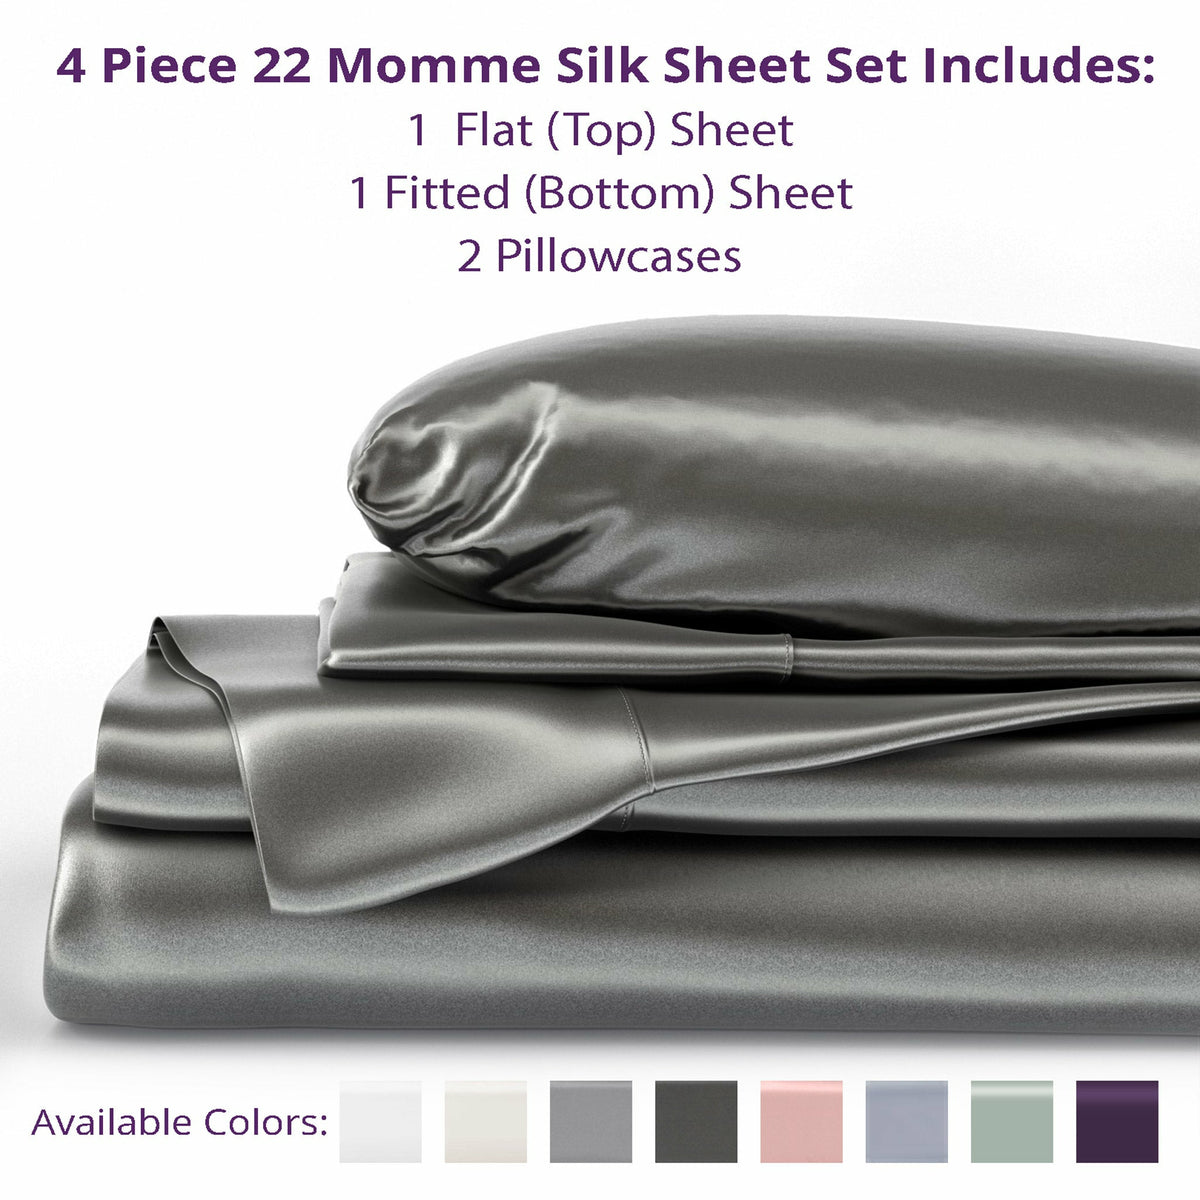 Mulberry Park Silks 22 Momme Silk Flat Sheets Inclusions Gunmetal Fine Linens